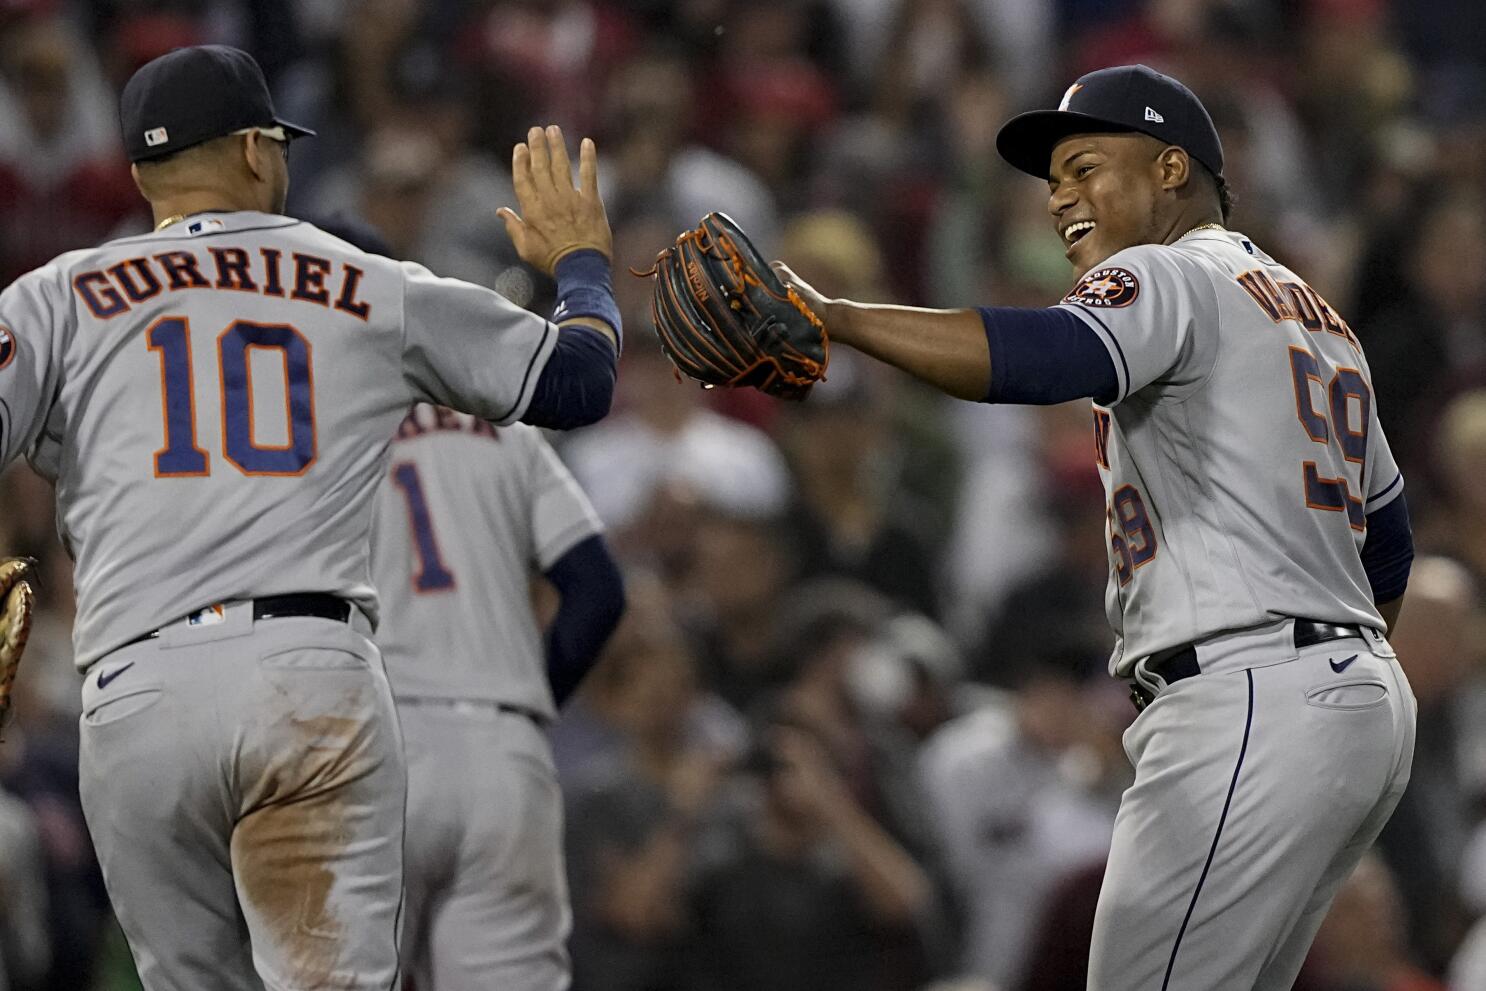 2021 ALCS matchup set: Red Sox will play Astros for the pennant